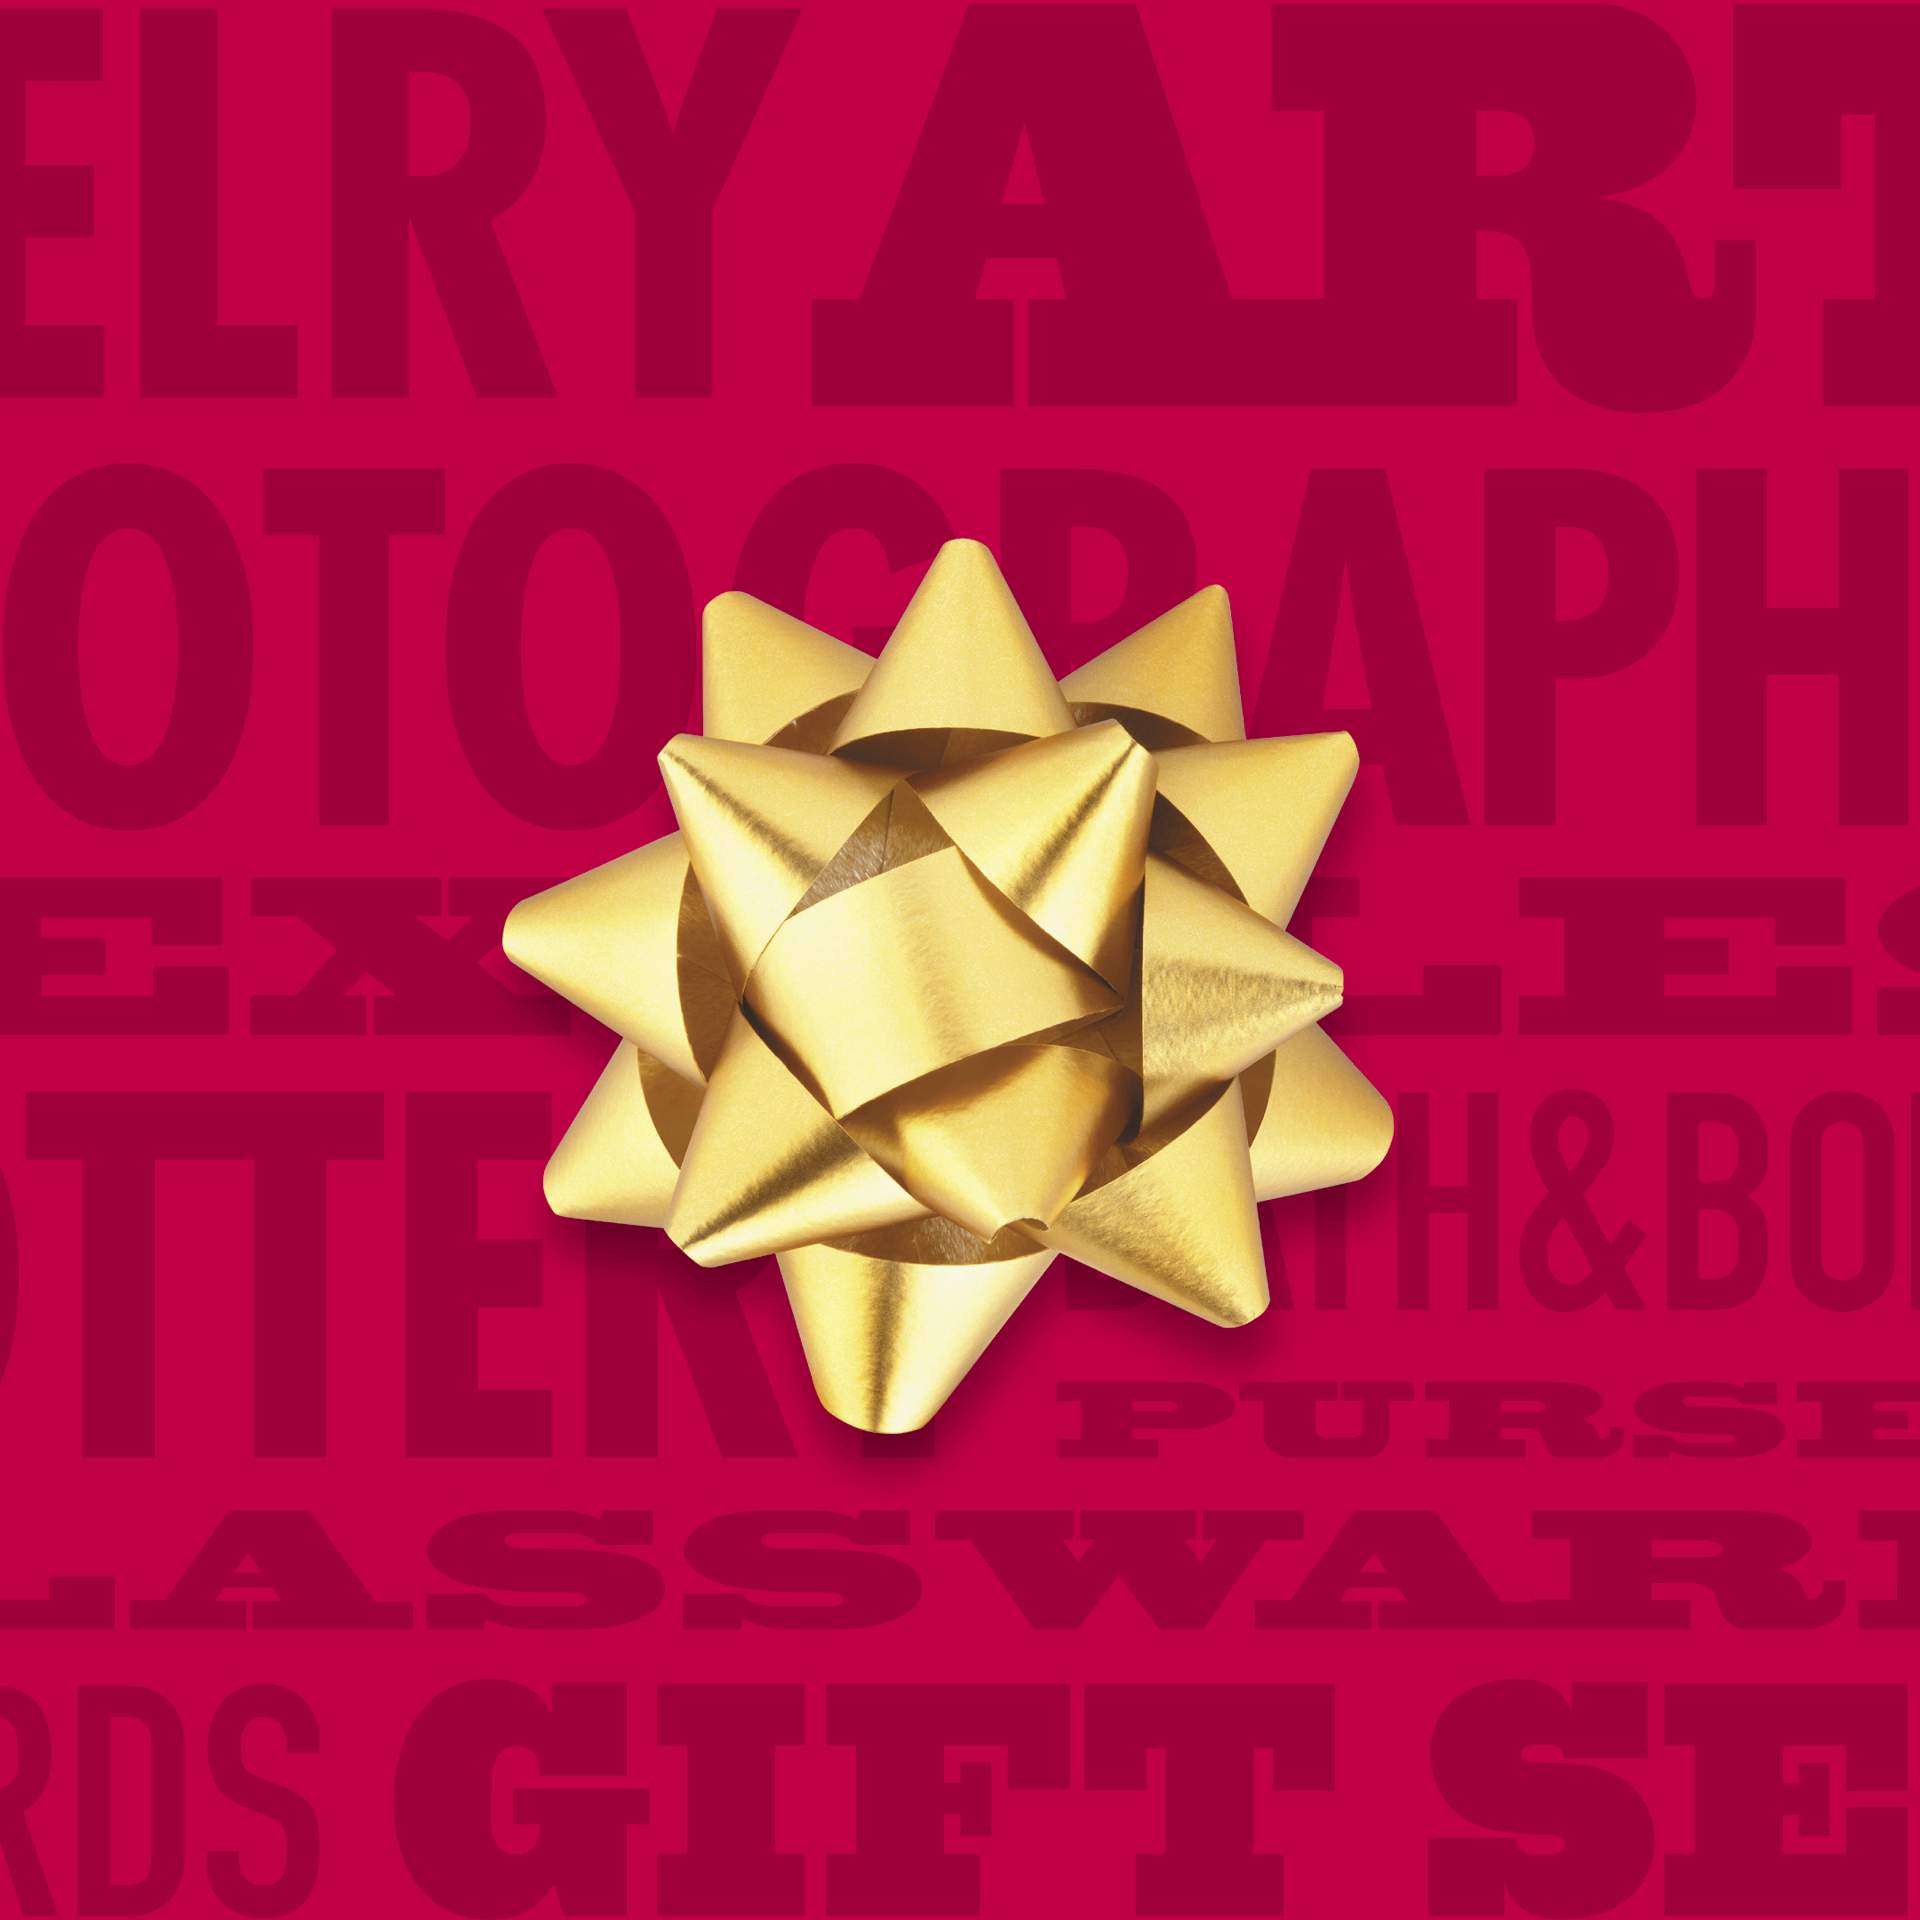 Art is a Gift: Holiday Art & Gift Sale at the Burchfield Penney